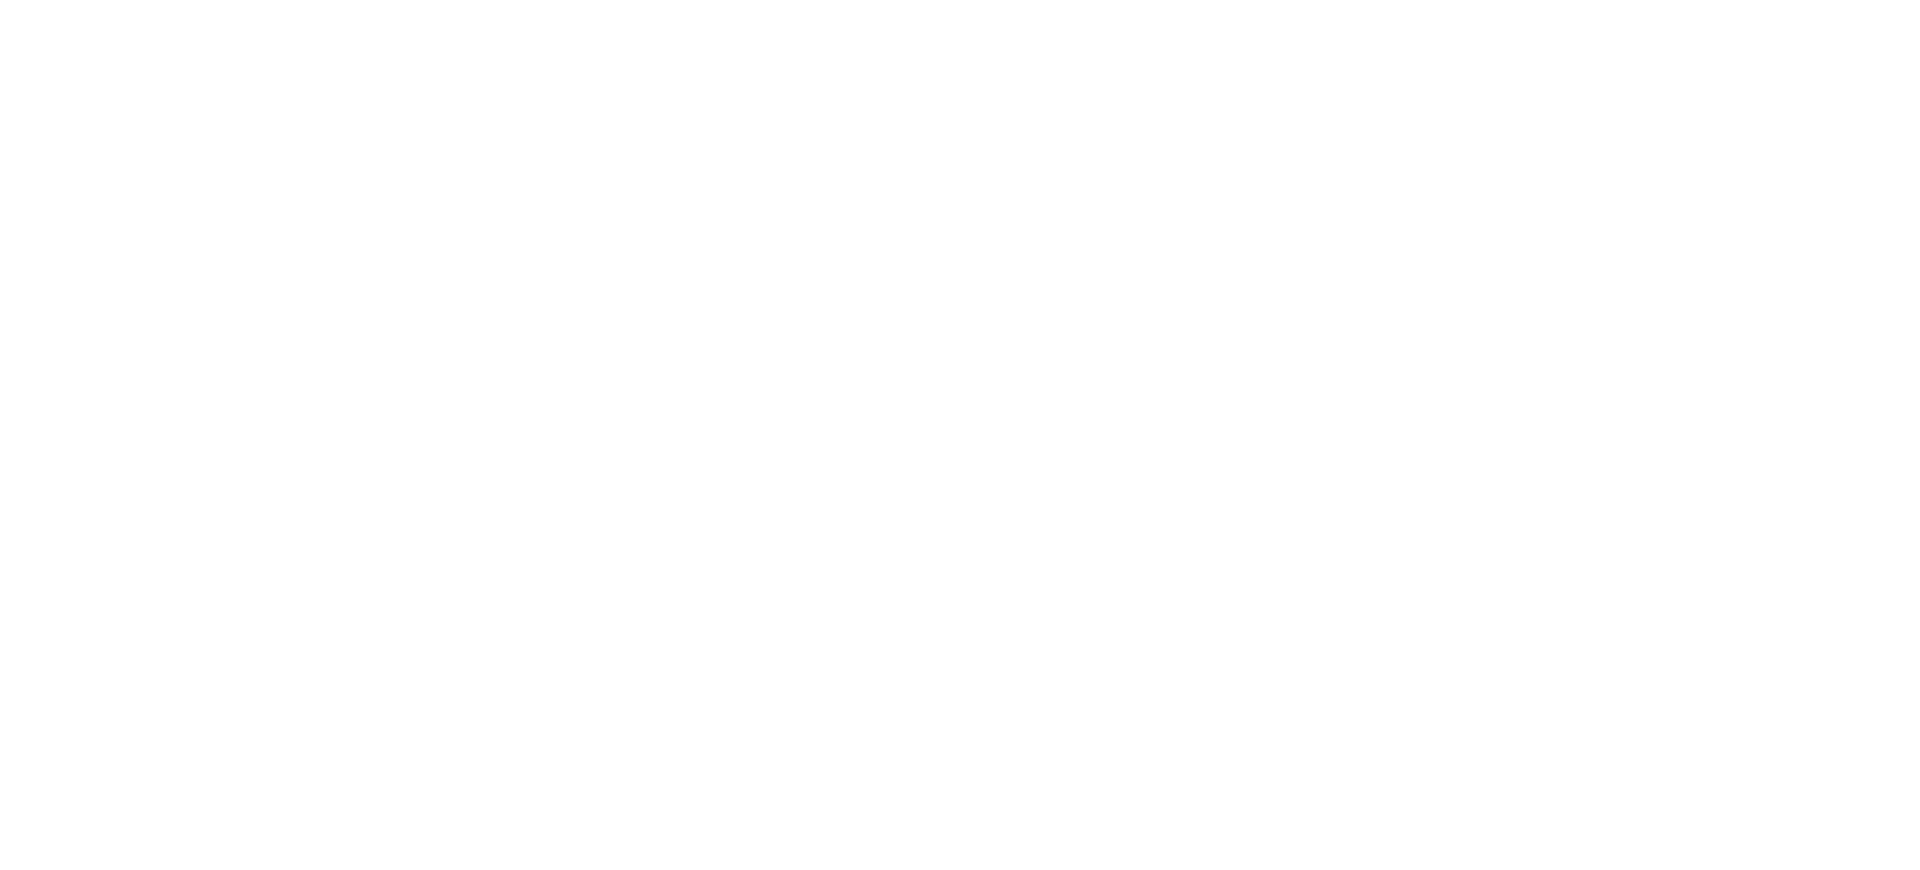 The Restoration Place white logo with brushstroke and cityscape